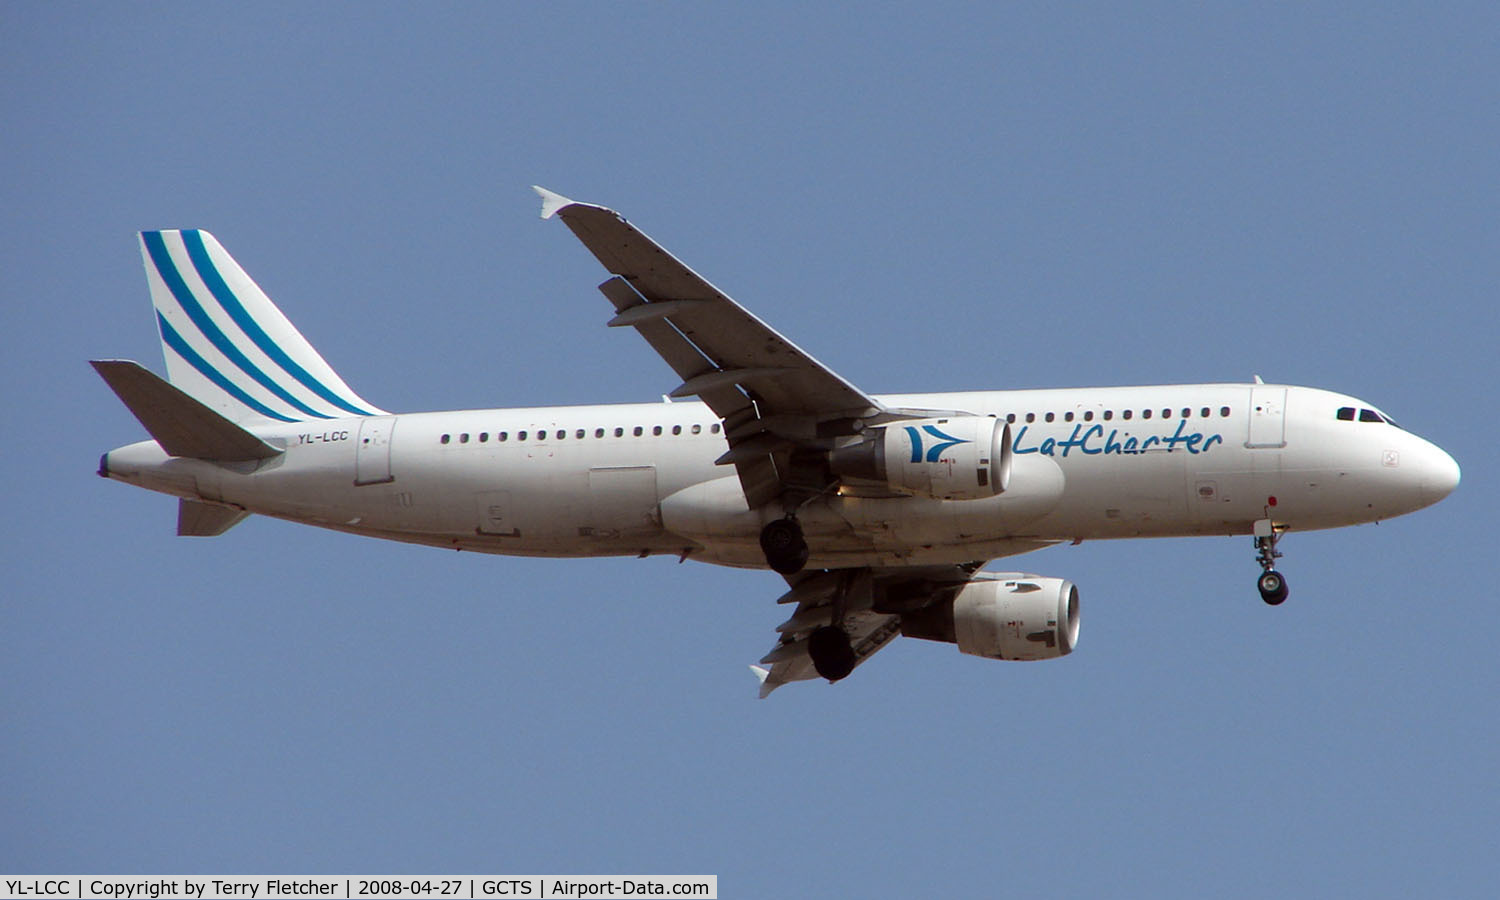 YL-LCC, 1992 Airbus A320-211 C/N 310, Lat Charter's A320 on lease to Air Malta approaches Tenerife South